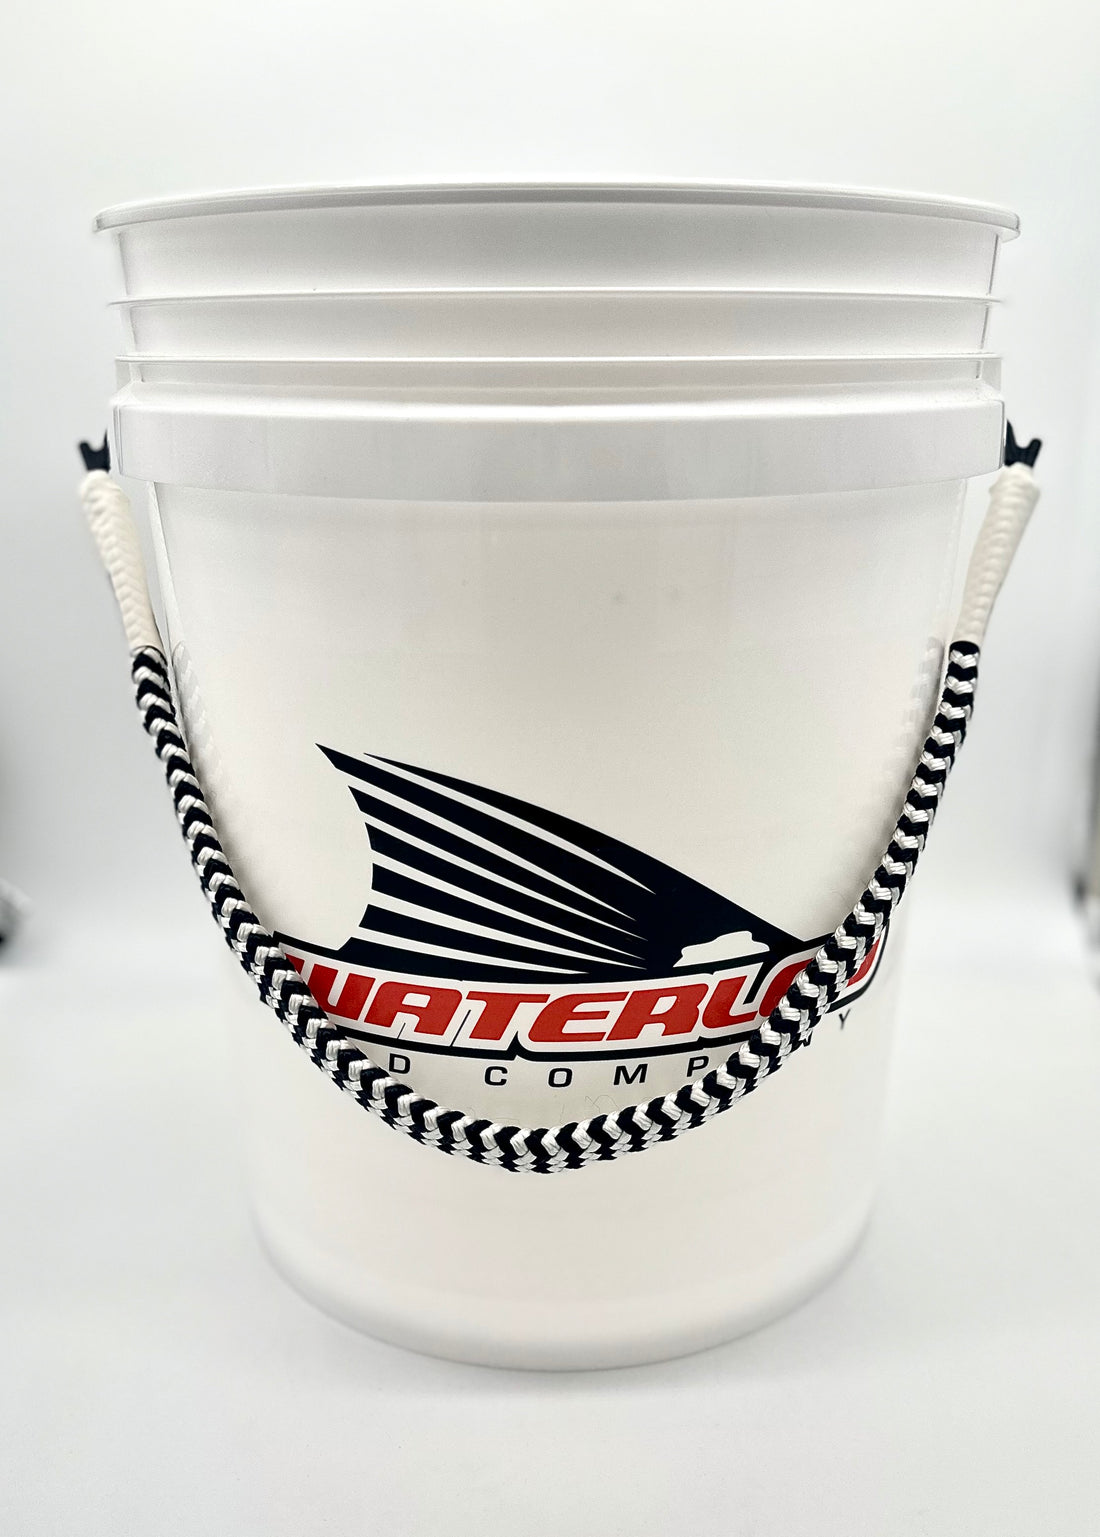 Waterloo 5 Gallon White Bucket with Rope Handle - Tails Up Logo